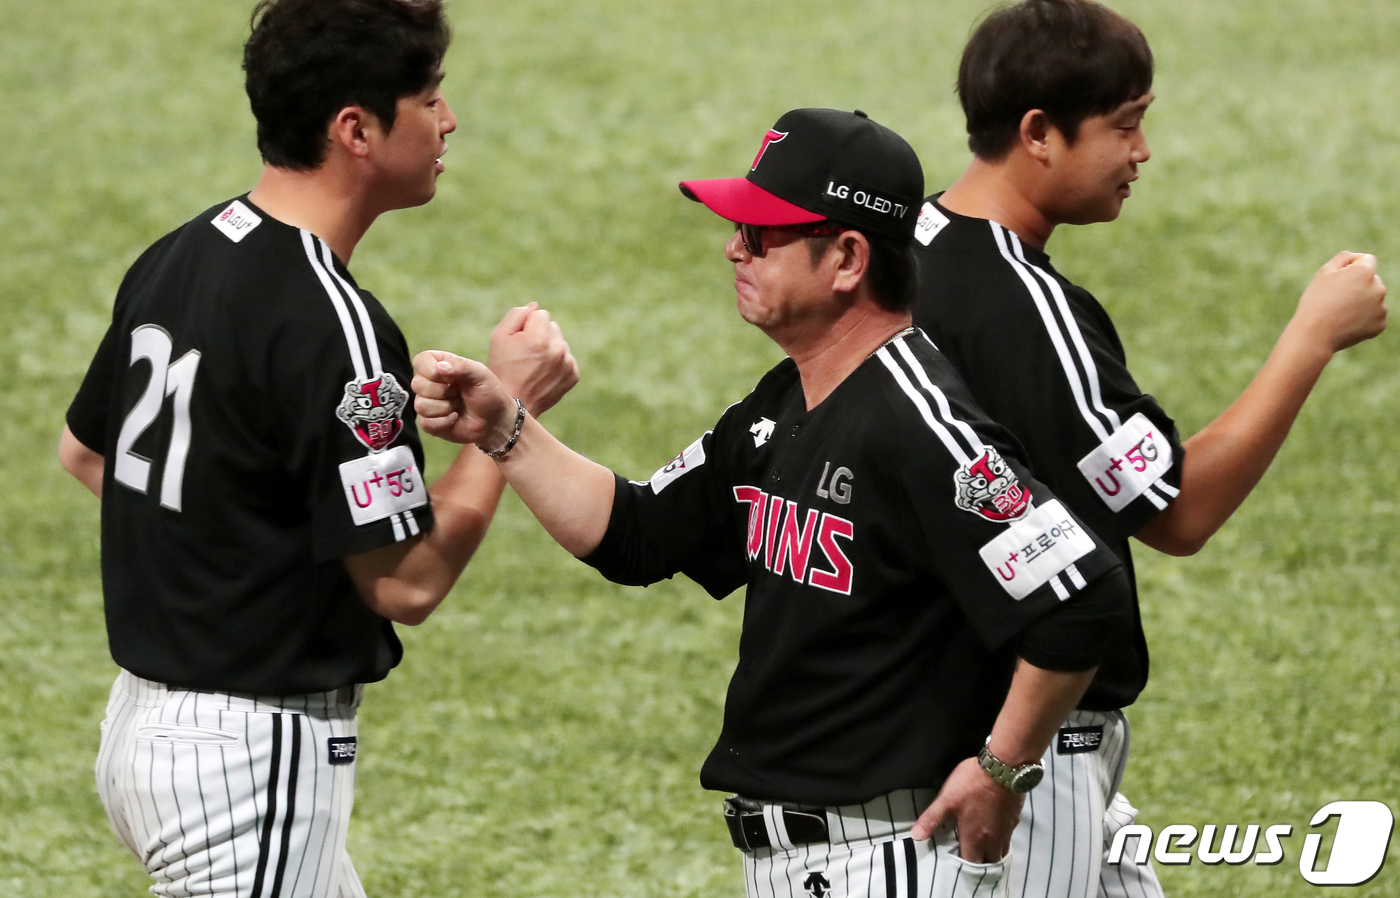 Ryu Jung-il, LG coach, explained the change in the rotation of the starting rotation this week ahead of the 2020 Shinhan Bank SOL KBO League Kiwoom Heroes game held at Jamsil Stadium in Seoul on October 10.Initially, LGs starting rotation was twisted.One of the Kyonggi was canceled last weekend and was pushed to Kyonggi on Monday, the 7th of this week, which led to the 7th consecutive game from Monday to Sunday.It was a situation where there was a problem in the operation of the starter.Lee Min-ho was in the game against Lotte Mart on the 7th, and Jeong Chan-Heon was in the order before Gwangju Kia on the 8th.After that, Casey Kelly Clarkson, Tyler Brian Wilson, Im Chan-kyu and Kim Yun-stock led to a vacancy in Jamsil Samsung on the 13th.The speciality of LGs starters also had to be considered.This season, LG is managing the number of appearances against Lee Min-ho and Jeong Chan-Heon, and Lee Min-ho is lacking experience in the first year of full time, and Jeong Chan-Heon is careful about injury power.So, the two players are running a so-called 10-day rotation that alternates one place, and even if they do not, they try to avoid at least two players twice a week.As a result, Lee Min-ho and Jeong Chan-Heons 13th appearance became difficult and one place was empty.Ryu said, We will call mercenaries in the second group.The mercenary is a pitcher who is preparing to be selected in the second group, not a foreign player, and Lee Woo-chan and Lee Sang-gyu are considered candidates.However, Lee Min-ho was early to pitch 57 in 113 innings in Lotte Mart on the 7th, so it was not necessary to cancel the rain to Kyonggi the day before.It rained yesterday and the rotation was pushed back; today Kelly Clarkson comes out and tomorrow Brian Wilson and Chan Kyu Yoon Sik, Ryu said.Kelly Clarkson 10th, Brian Wilson 11th, Im Chan-kyu 12th, Kim Yun-stock 13th, the schedule for this weeks start was naturally completed.Im very likely to be on the mound next Tuesday, he said of Lee Min-ho.Lee Min-ho, who was sluggish in the last Kyonggi, was allowed to step out after a long seven-day break.Kyonggi was canceled on the 9th, but Kelly Clarkson, Brian Wilson, Chan Kyu, Yoon Sik and Min Ho Soon were canceled on the 10th.